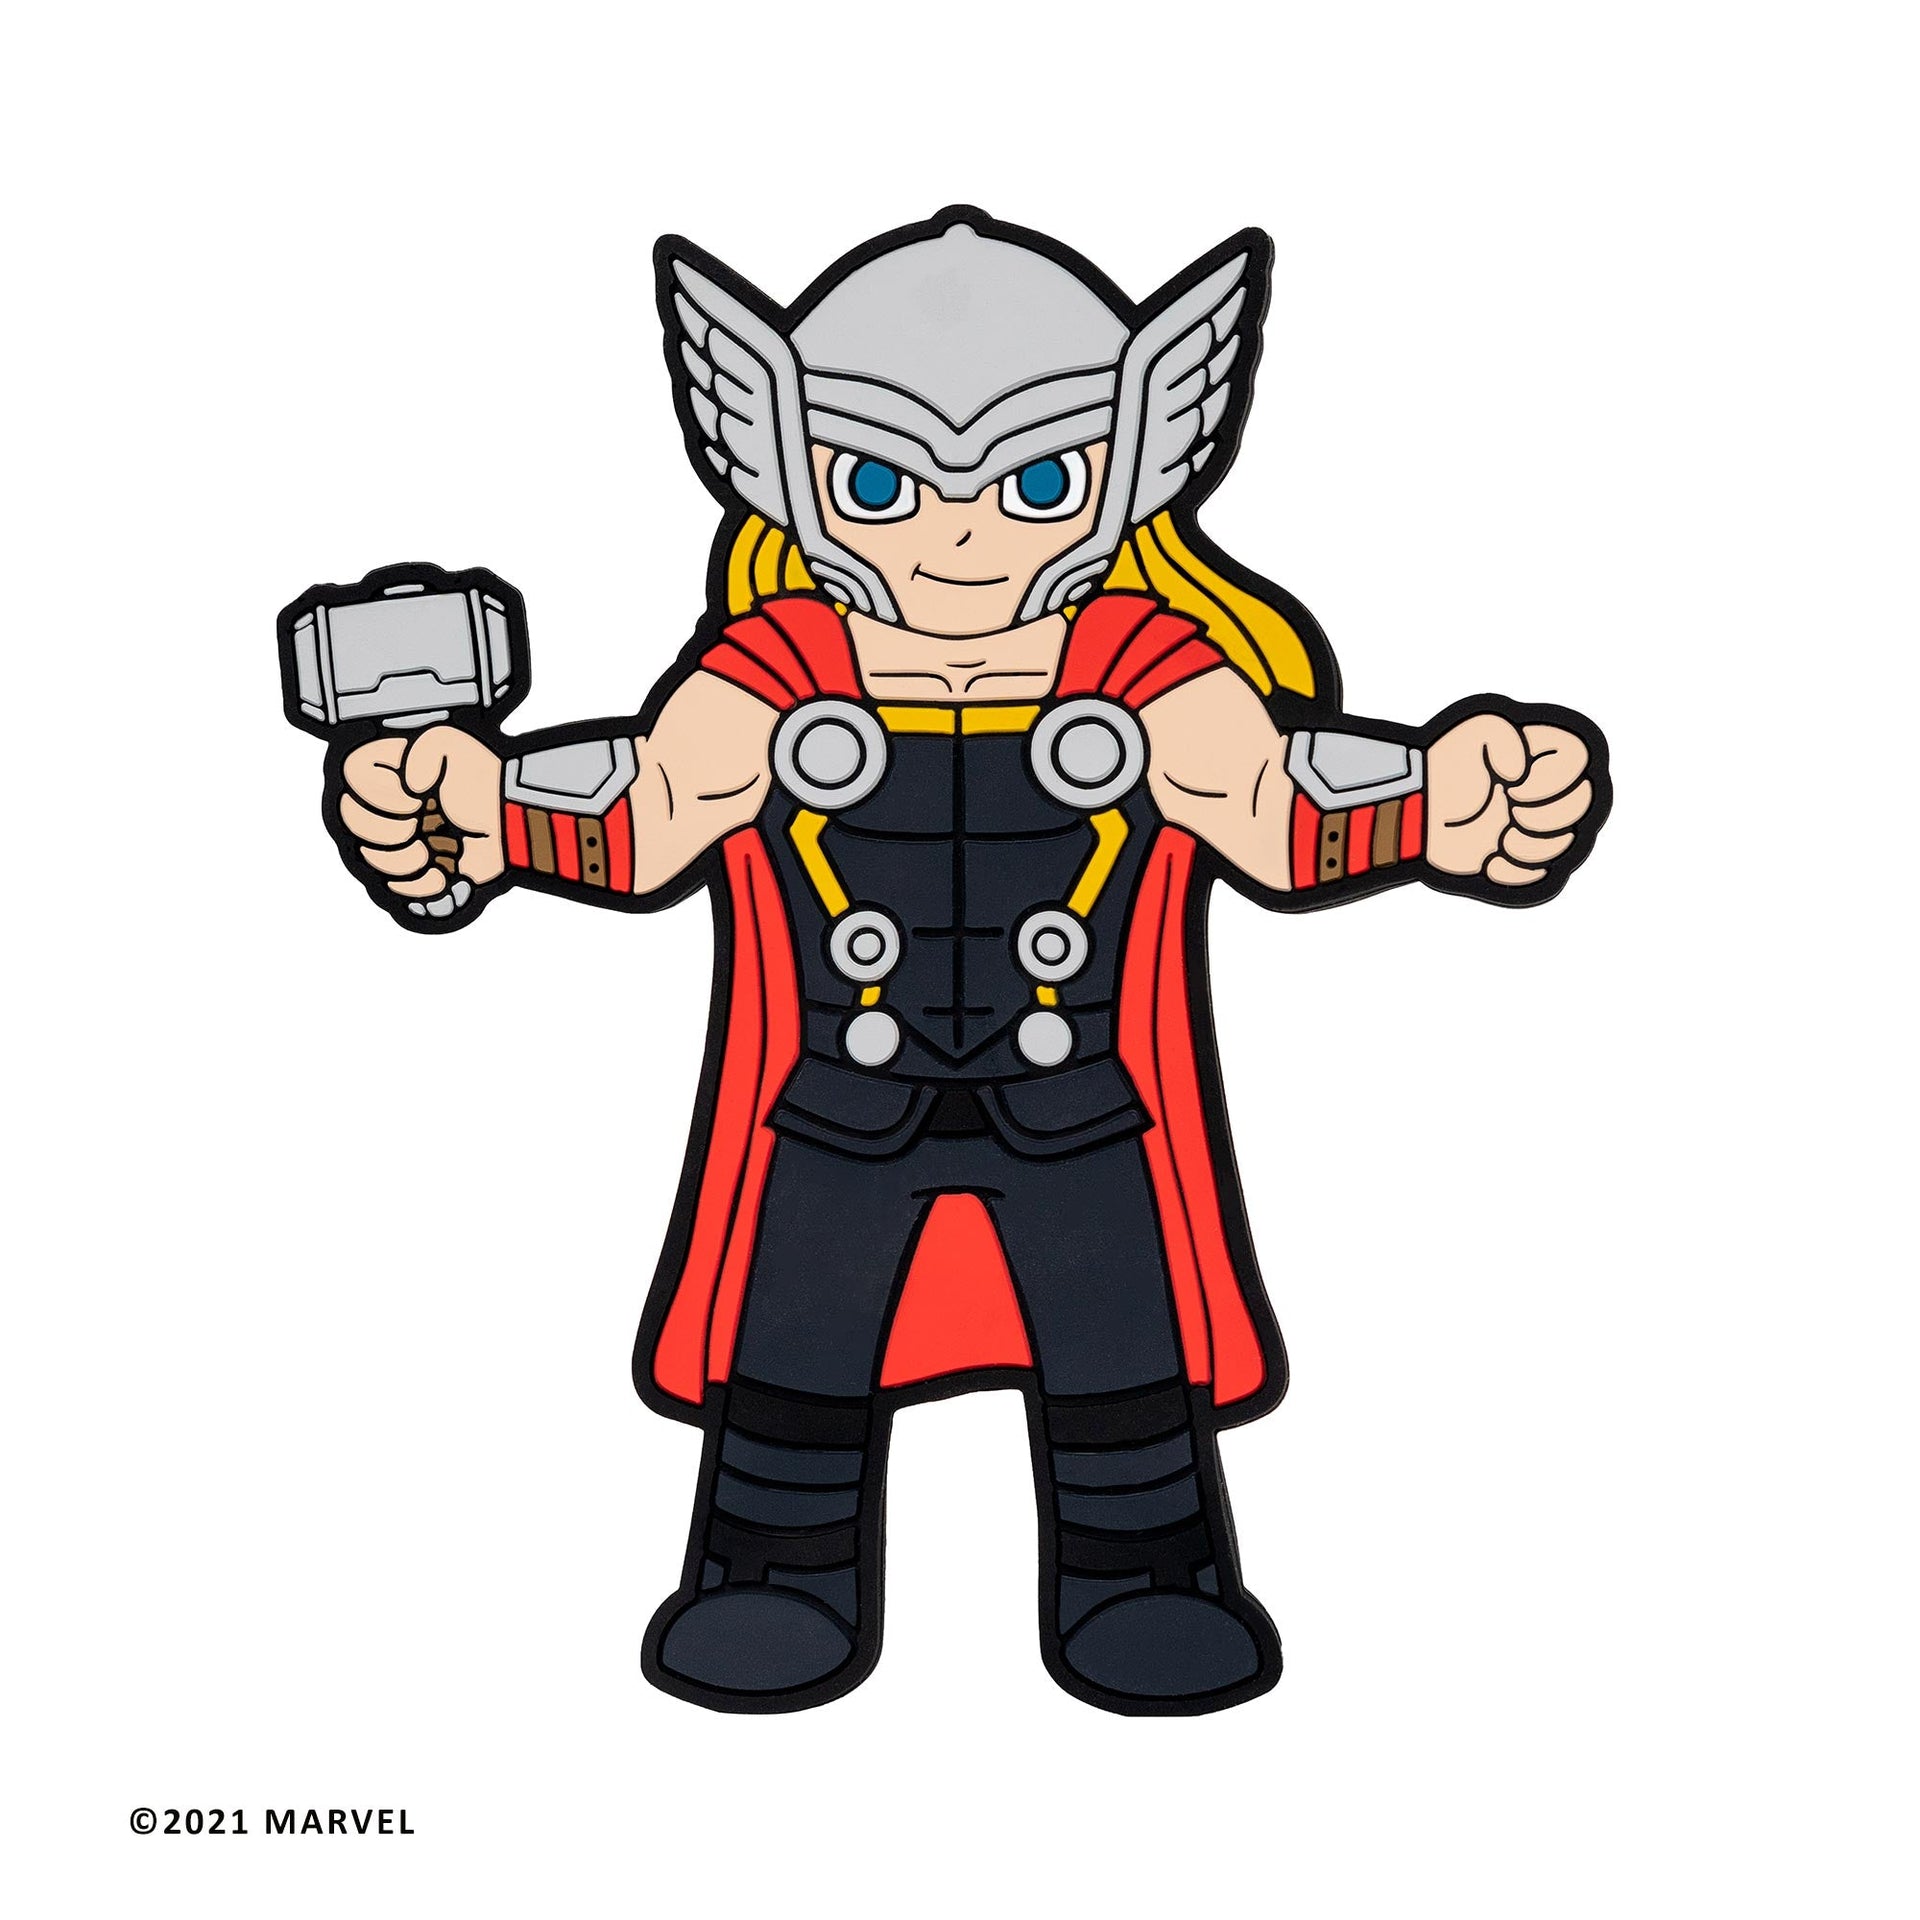 Image of Marvel Comics Thor Hug Buddy on a white background with arms and legs spread in the open position